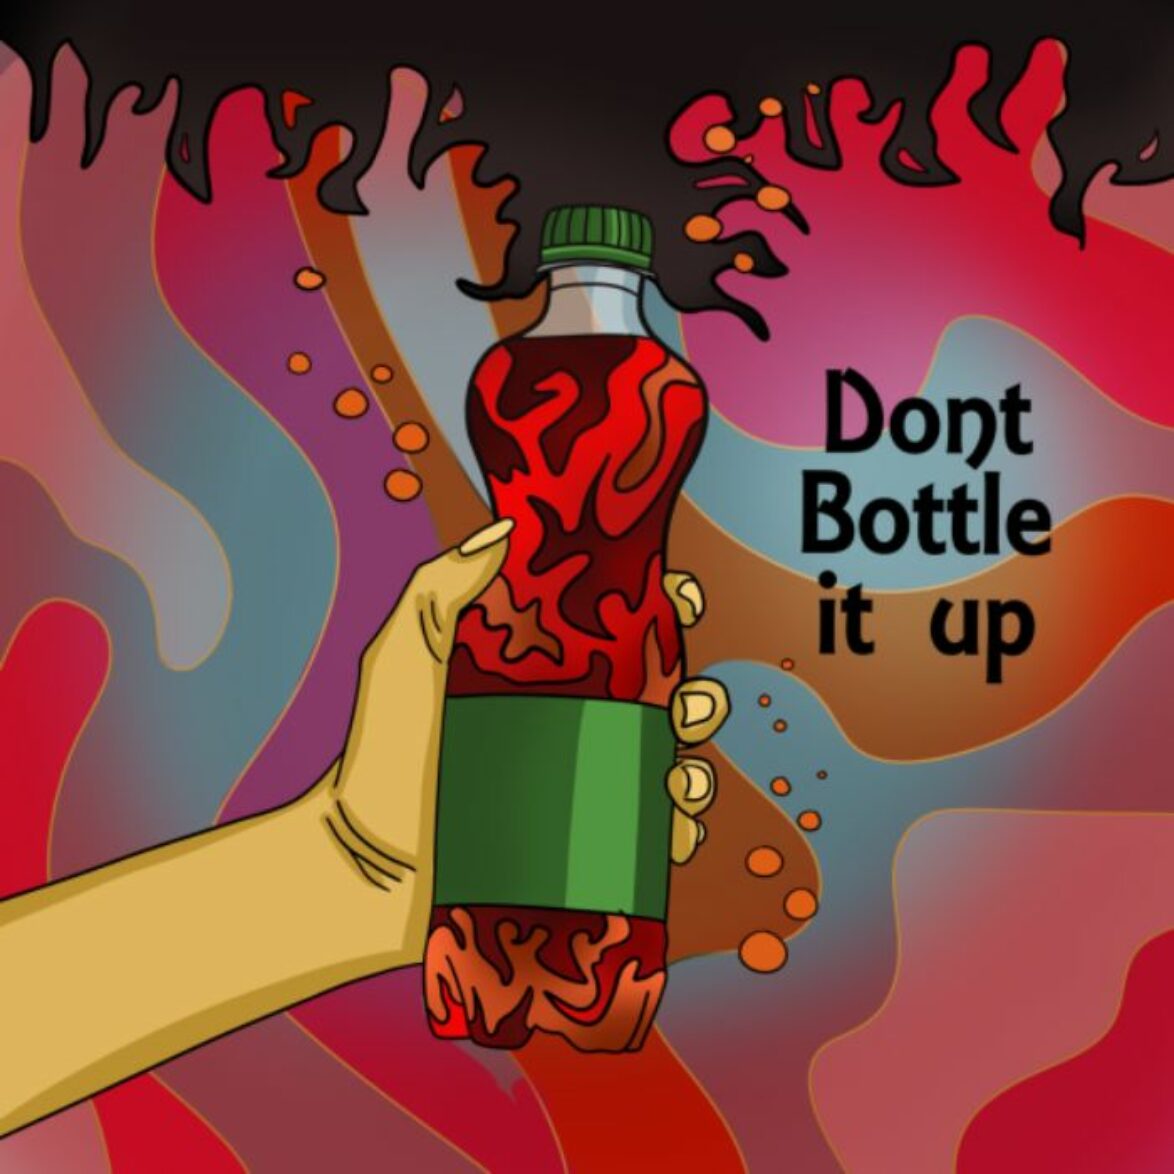 A colourful digital illustration of a hand holding a fizzy drinks bottle, with psychedelic-looking flames around, and the caption 'Don't bottle it up'.